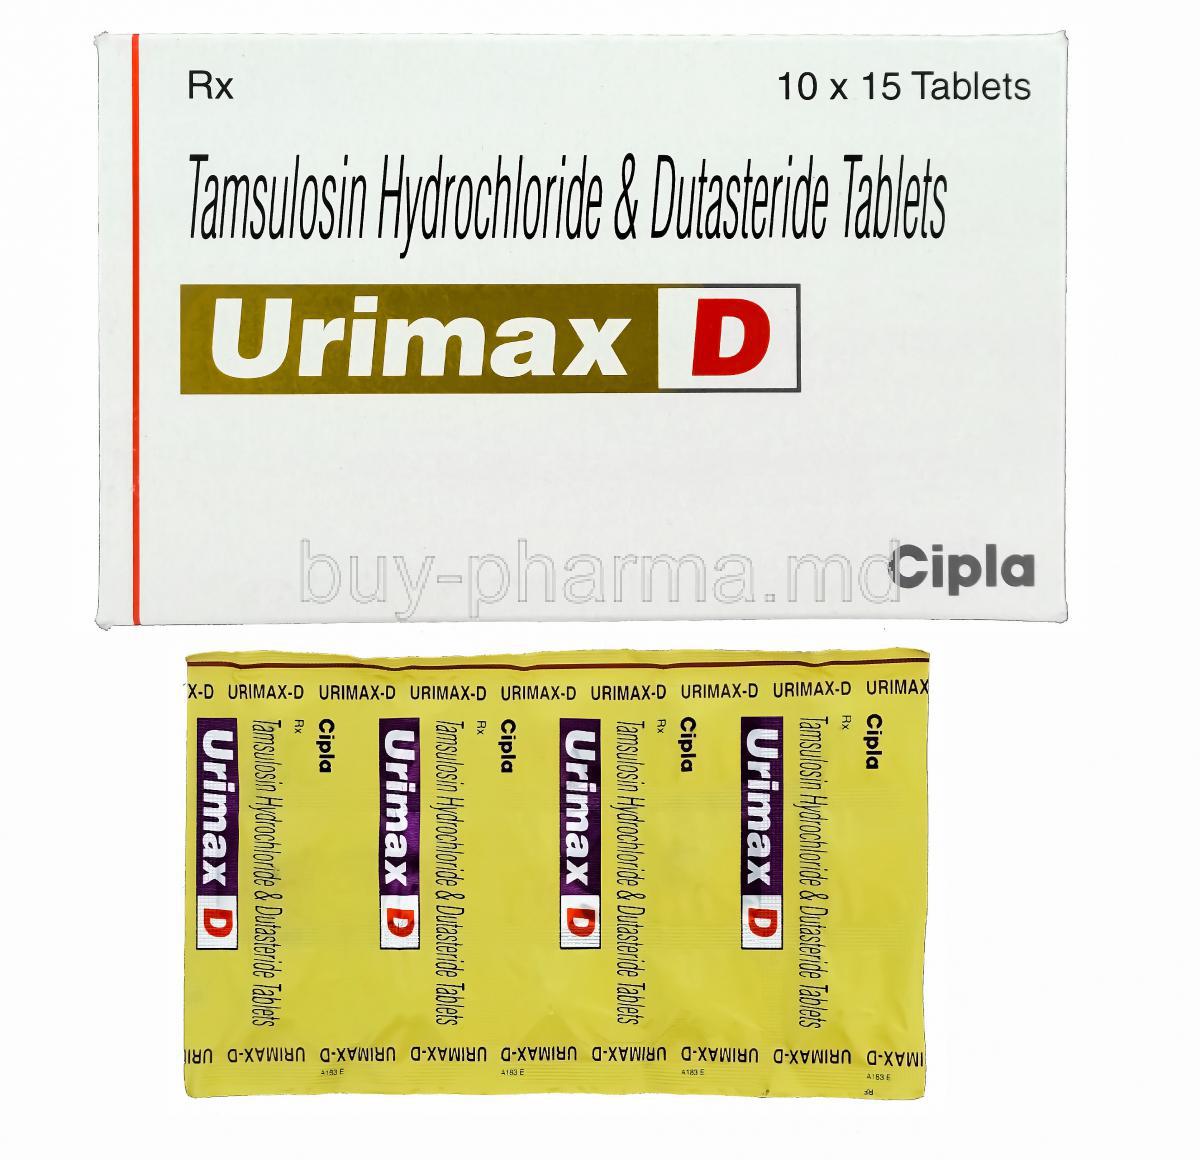 Urimax D, Tamsulosin Hydrochloride 0.4mg and Dutasteride 0.5mg